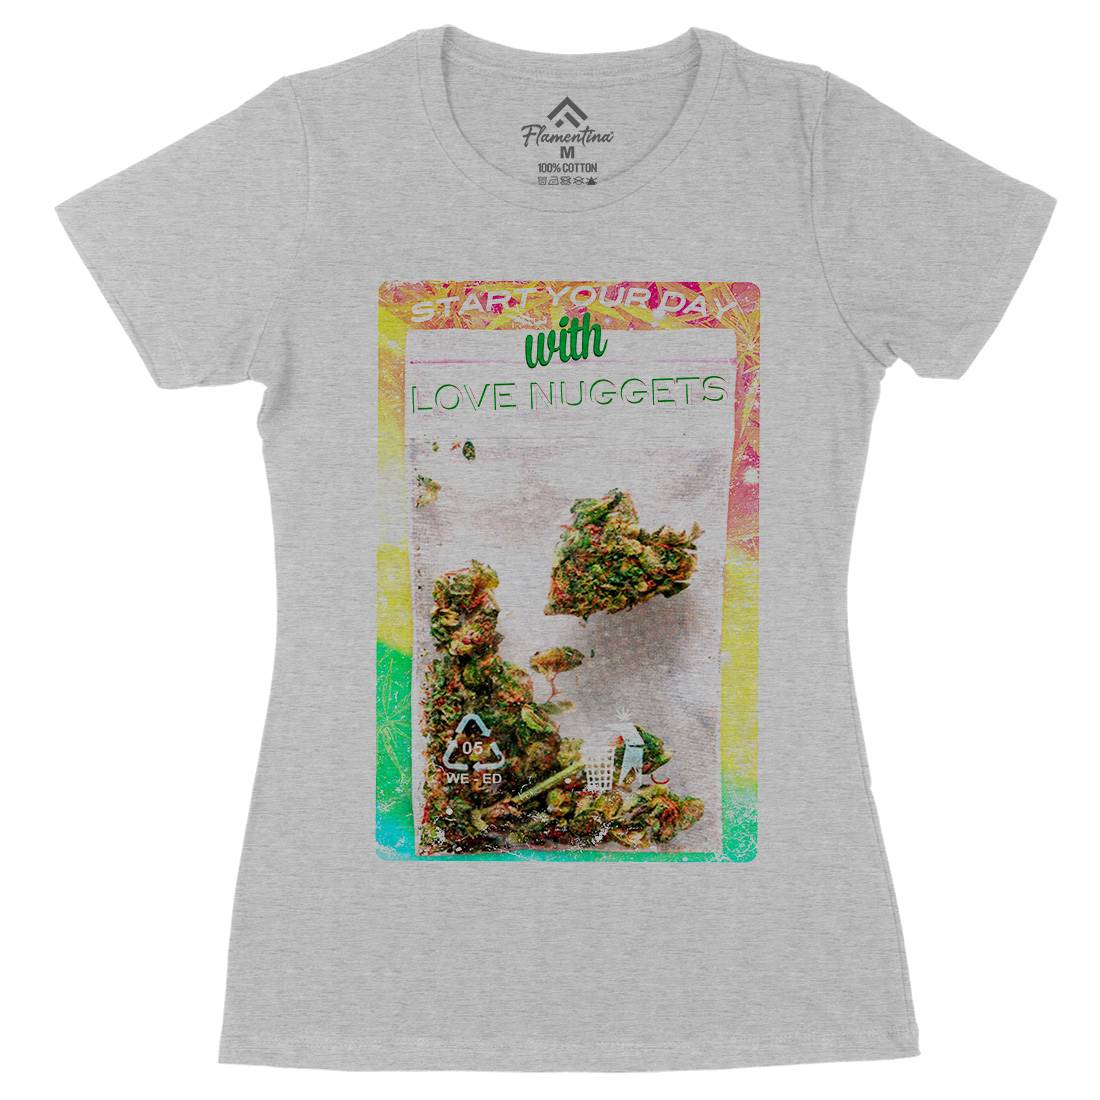 Love Nuggets Womens Organic Crew Neck T-Shirt Drugs A871